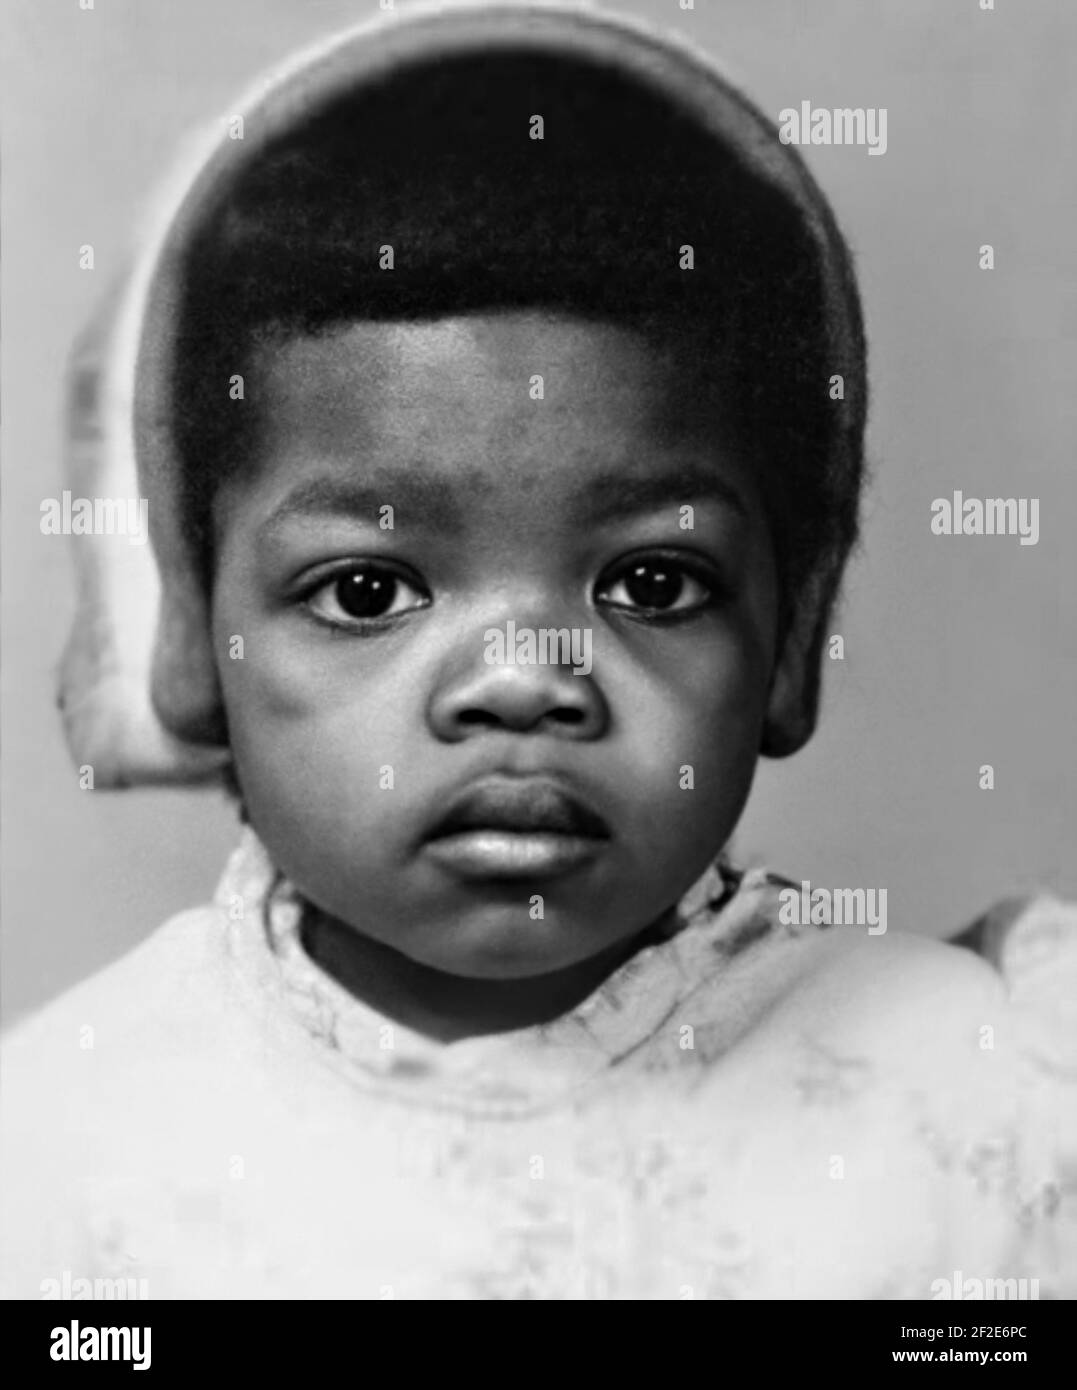 1956 ca , USA : The celebrated American television talk show host, journalist , writer and producer OPRAH WINFREY ( born 29 january 1954 ), when was young aged 2 . Unknown photographer. - HISTORY - FOTO STORICHE - personalità da giovane giovani - personality personalities when was young - PORTRAIT - RITRATTO - GIORNALISTA - JOURNALIST - GIORNALISMO - JOURNALISM - produttore - conduttore televisivo - presentatore - TV - produttore  - BAMBINA - BAMBINO - BAMBINI - CHILD - CHILDREN - INFANZIA - CHILDHOOD  --- ARCHIVIO GBB Stock Photo